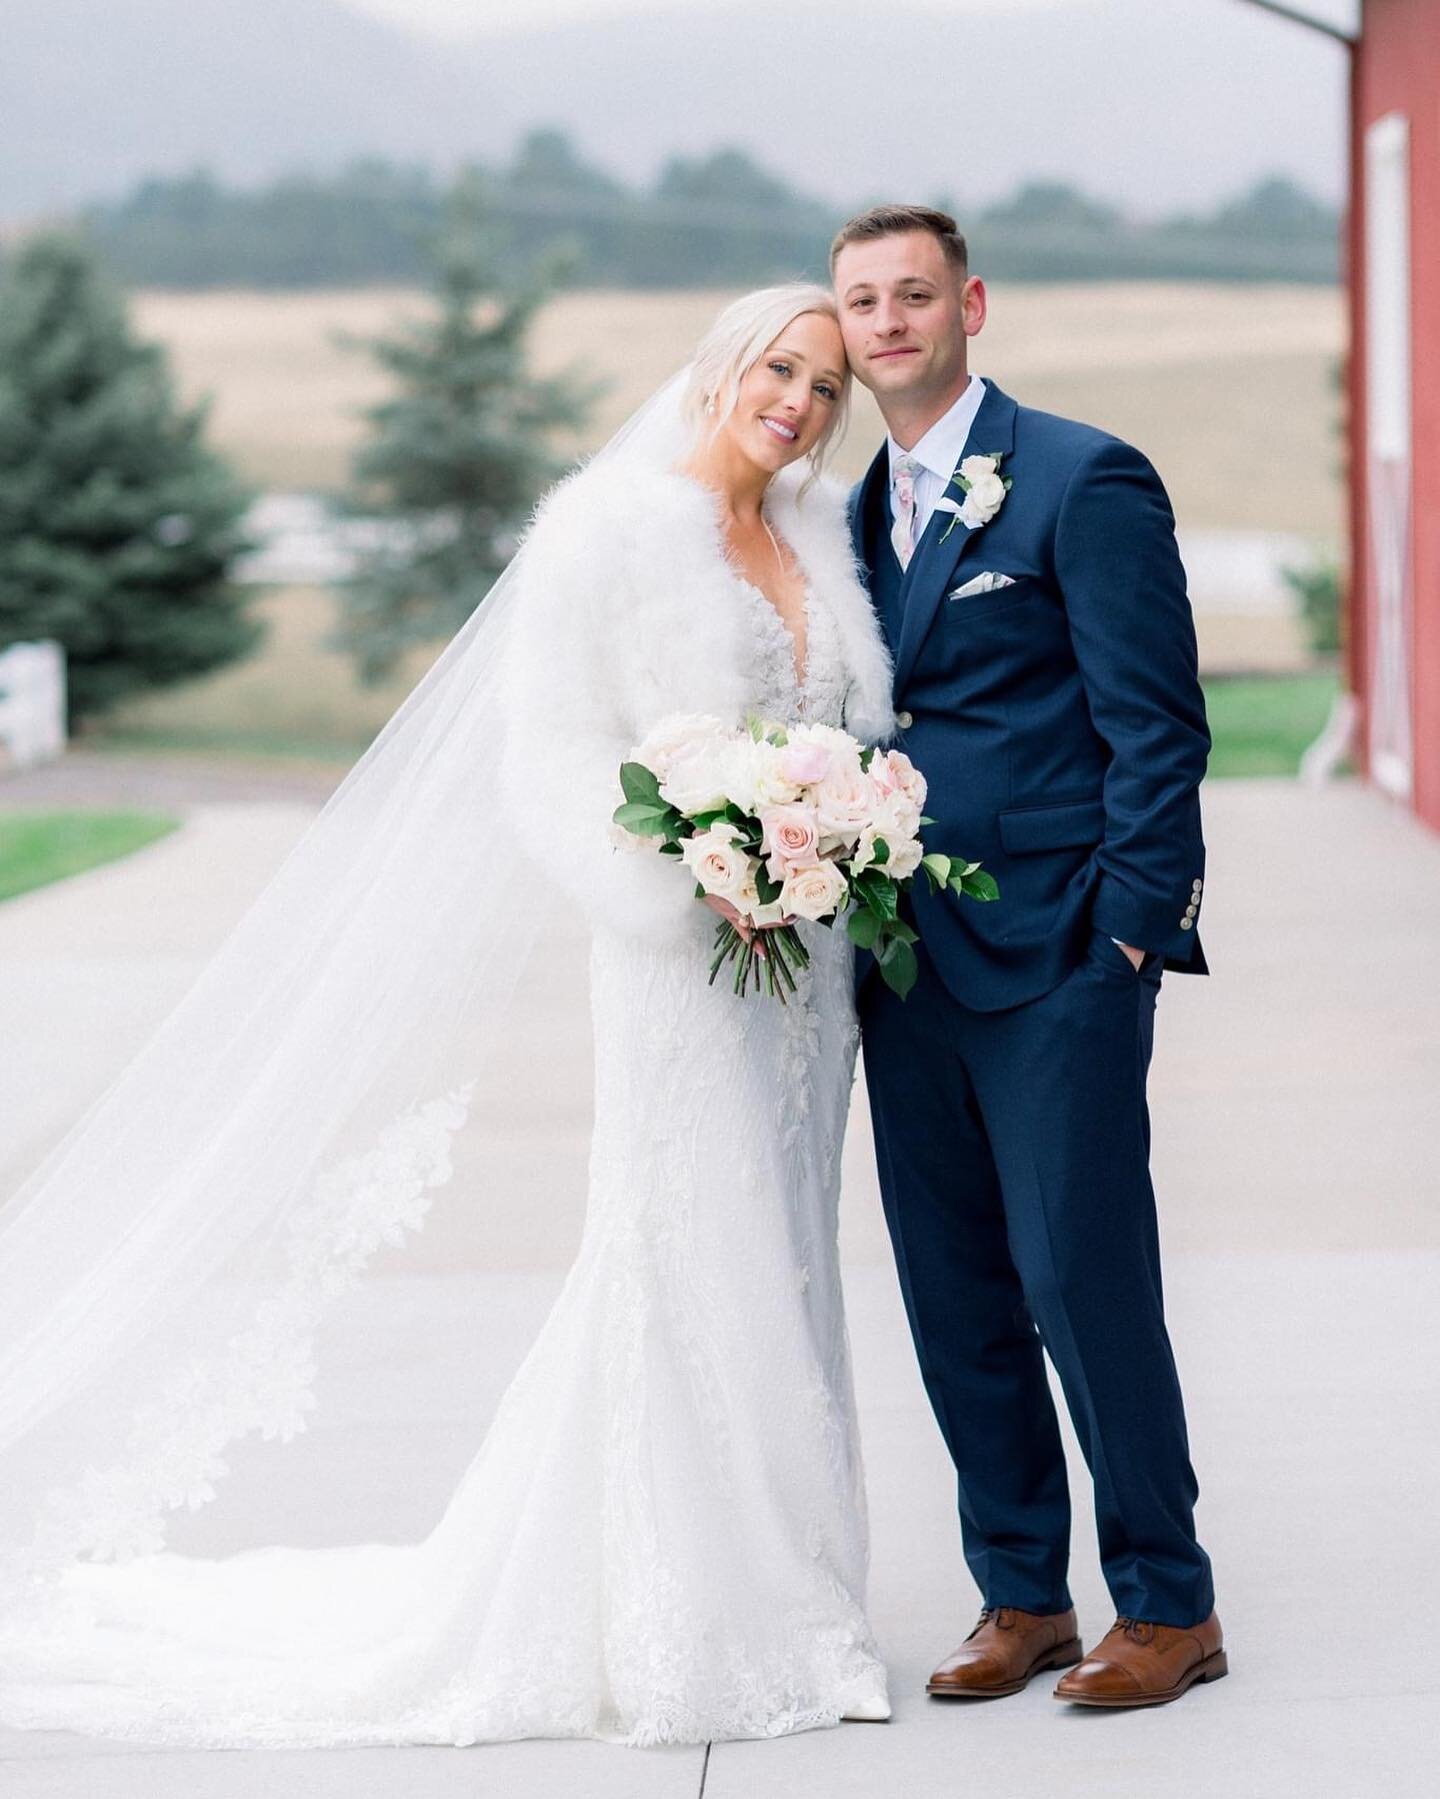 Kendall &amp; Ryan
Venue:  Crooked Willow Farms
Photos: Allison Easterling Photography
Planner:  Brandi with Cheers Events